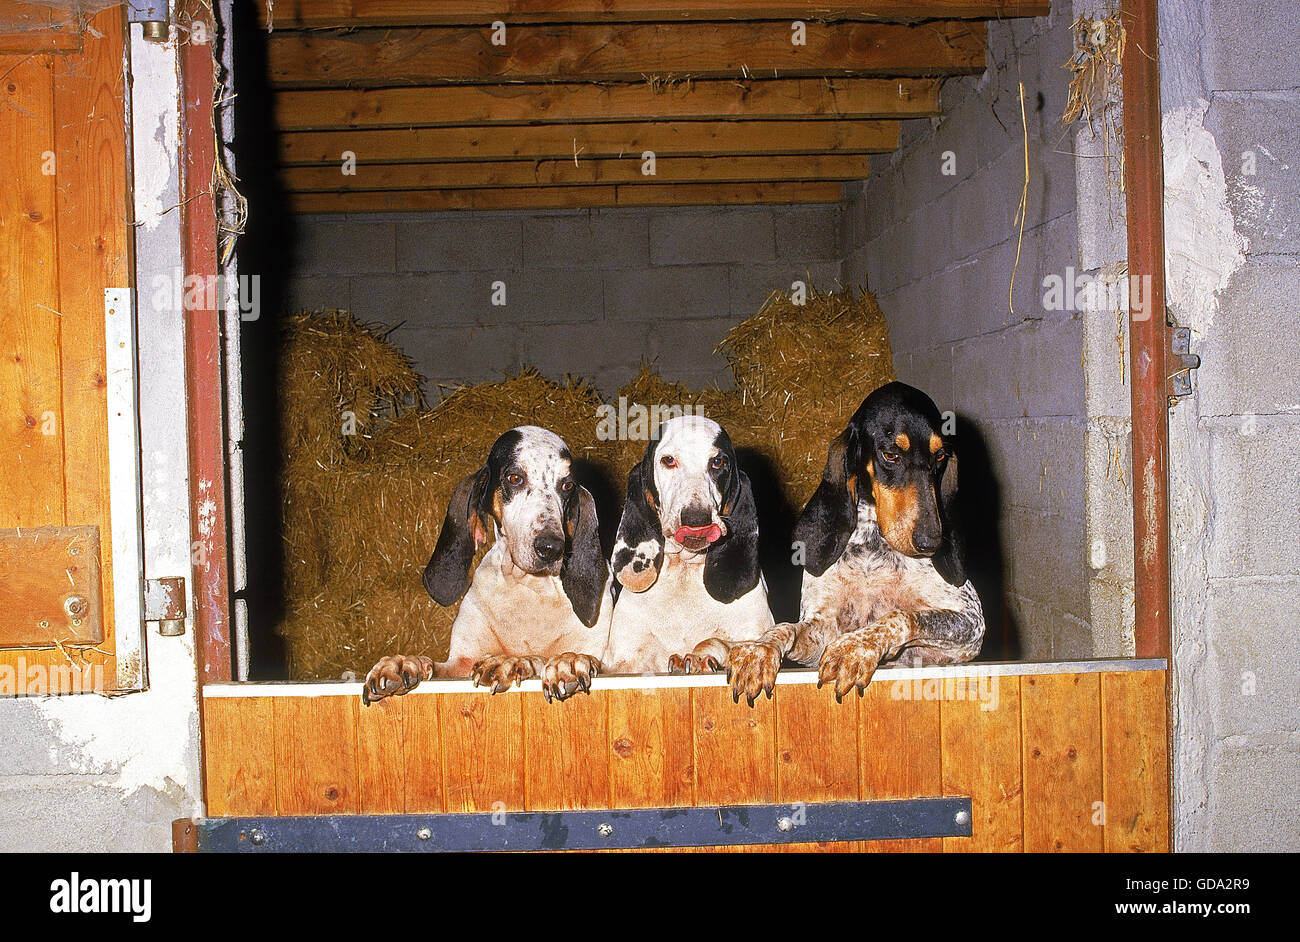 SMALL GASCON SAINTONGEOIS DOG, THREE ADULTS IN A HORSE BOX Stock Photo